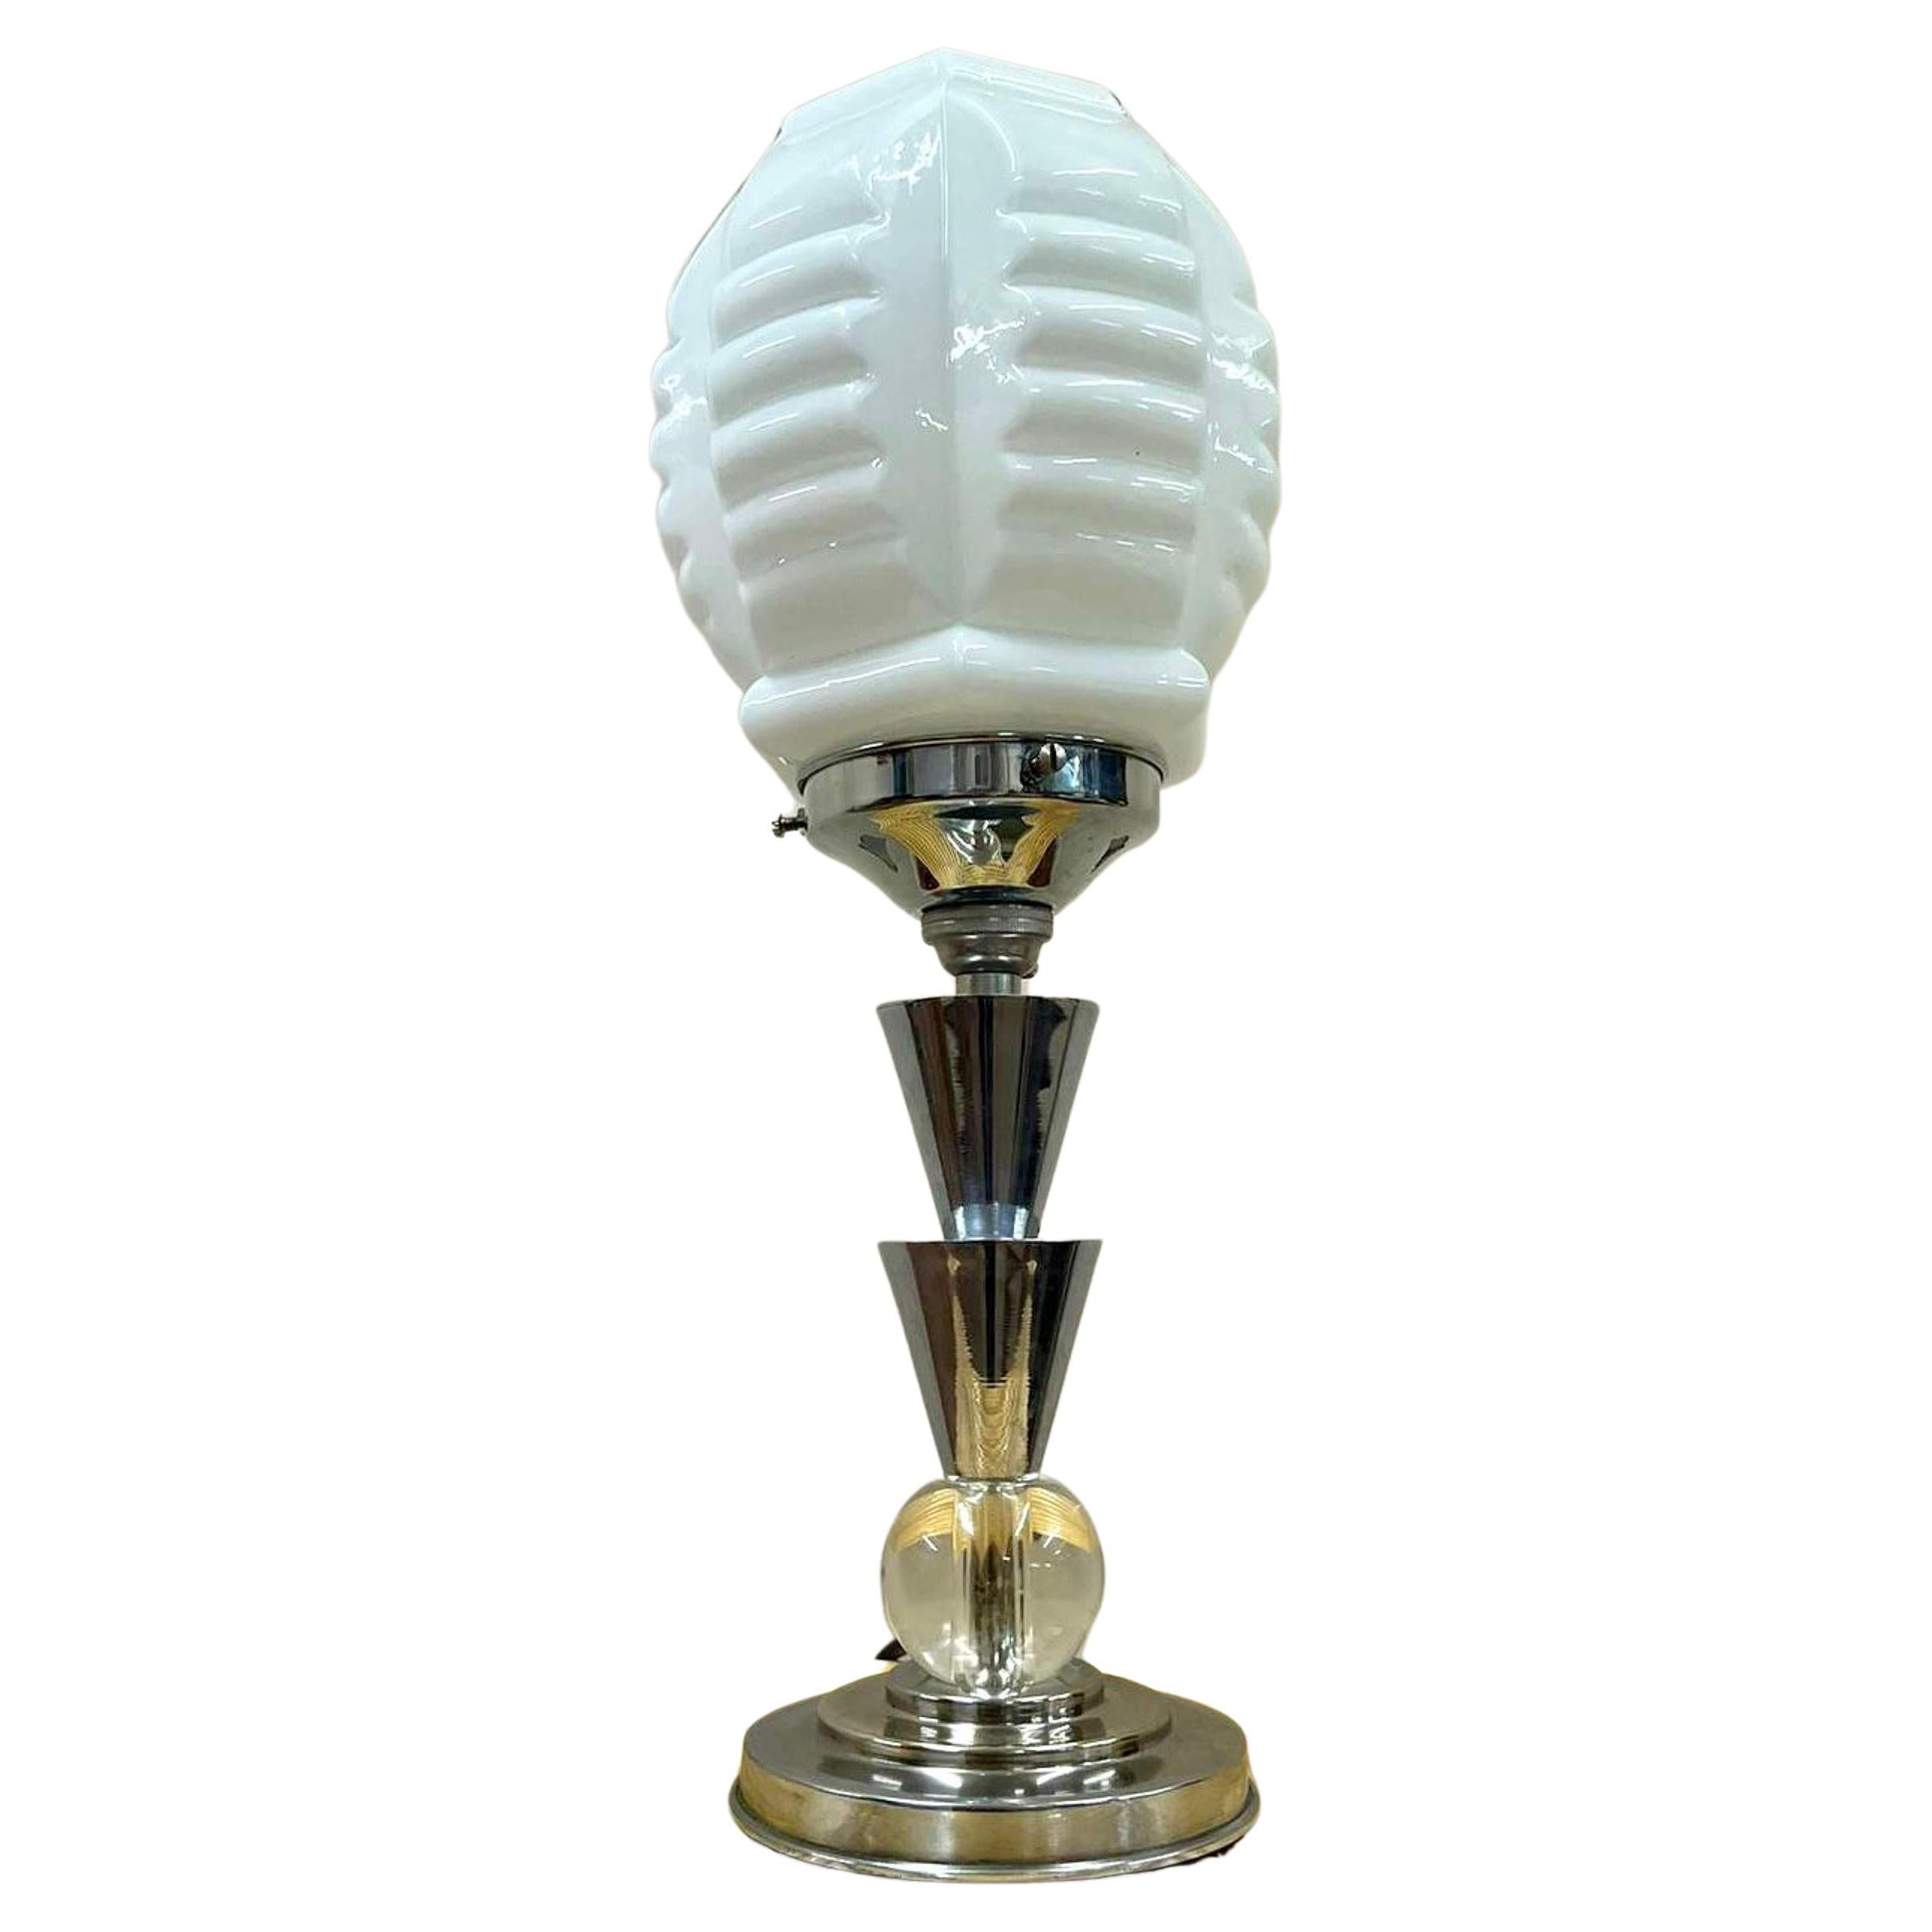 Art Deco Table Lamp, in the Manner of Designer Jacques Adnet